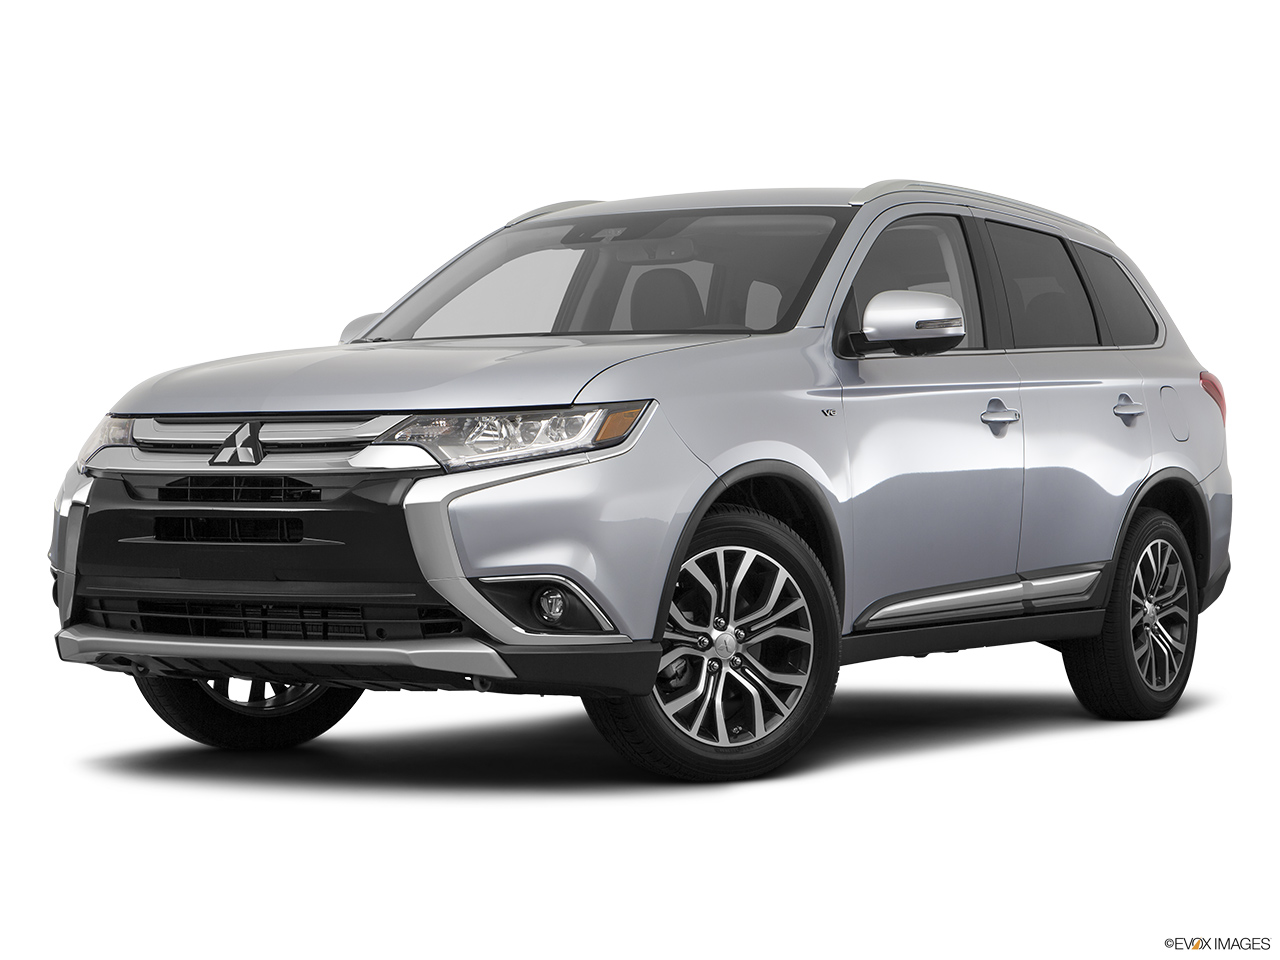 Cheapest SUV Canada Most Affordable Options in The Market LeaseCosts